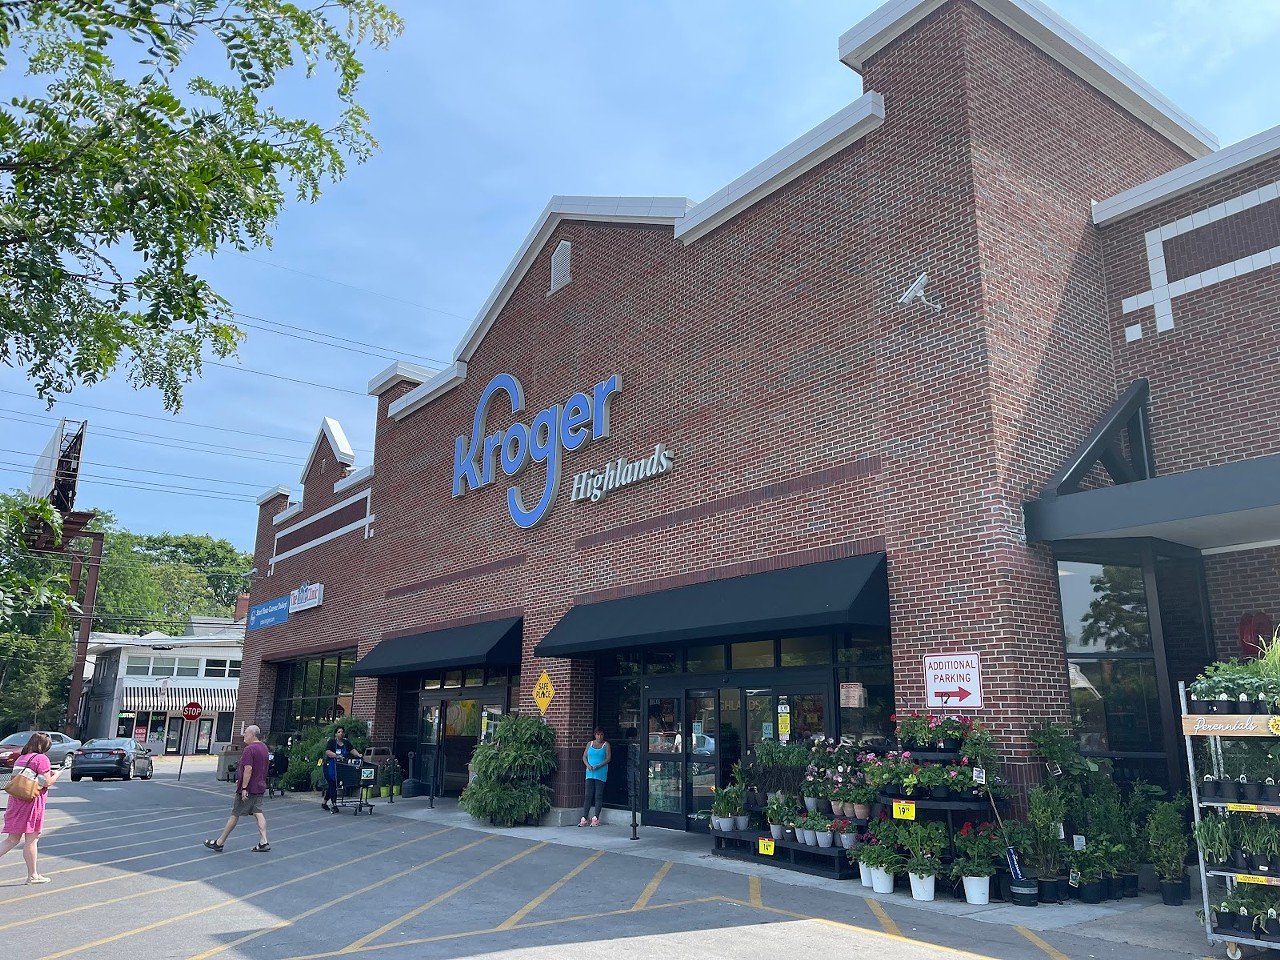 Highlands Kroger Nickname: Krogay, Singles Kroger
The most divisive Kroger in greater Louisville. To East Enders, it's awful. To others, well, it's the Middletown/Prospect Kroger of the area.